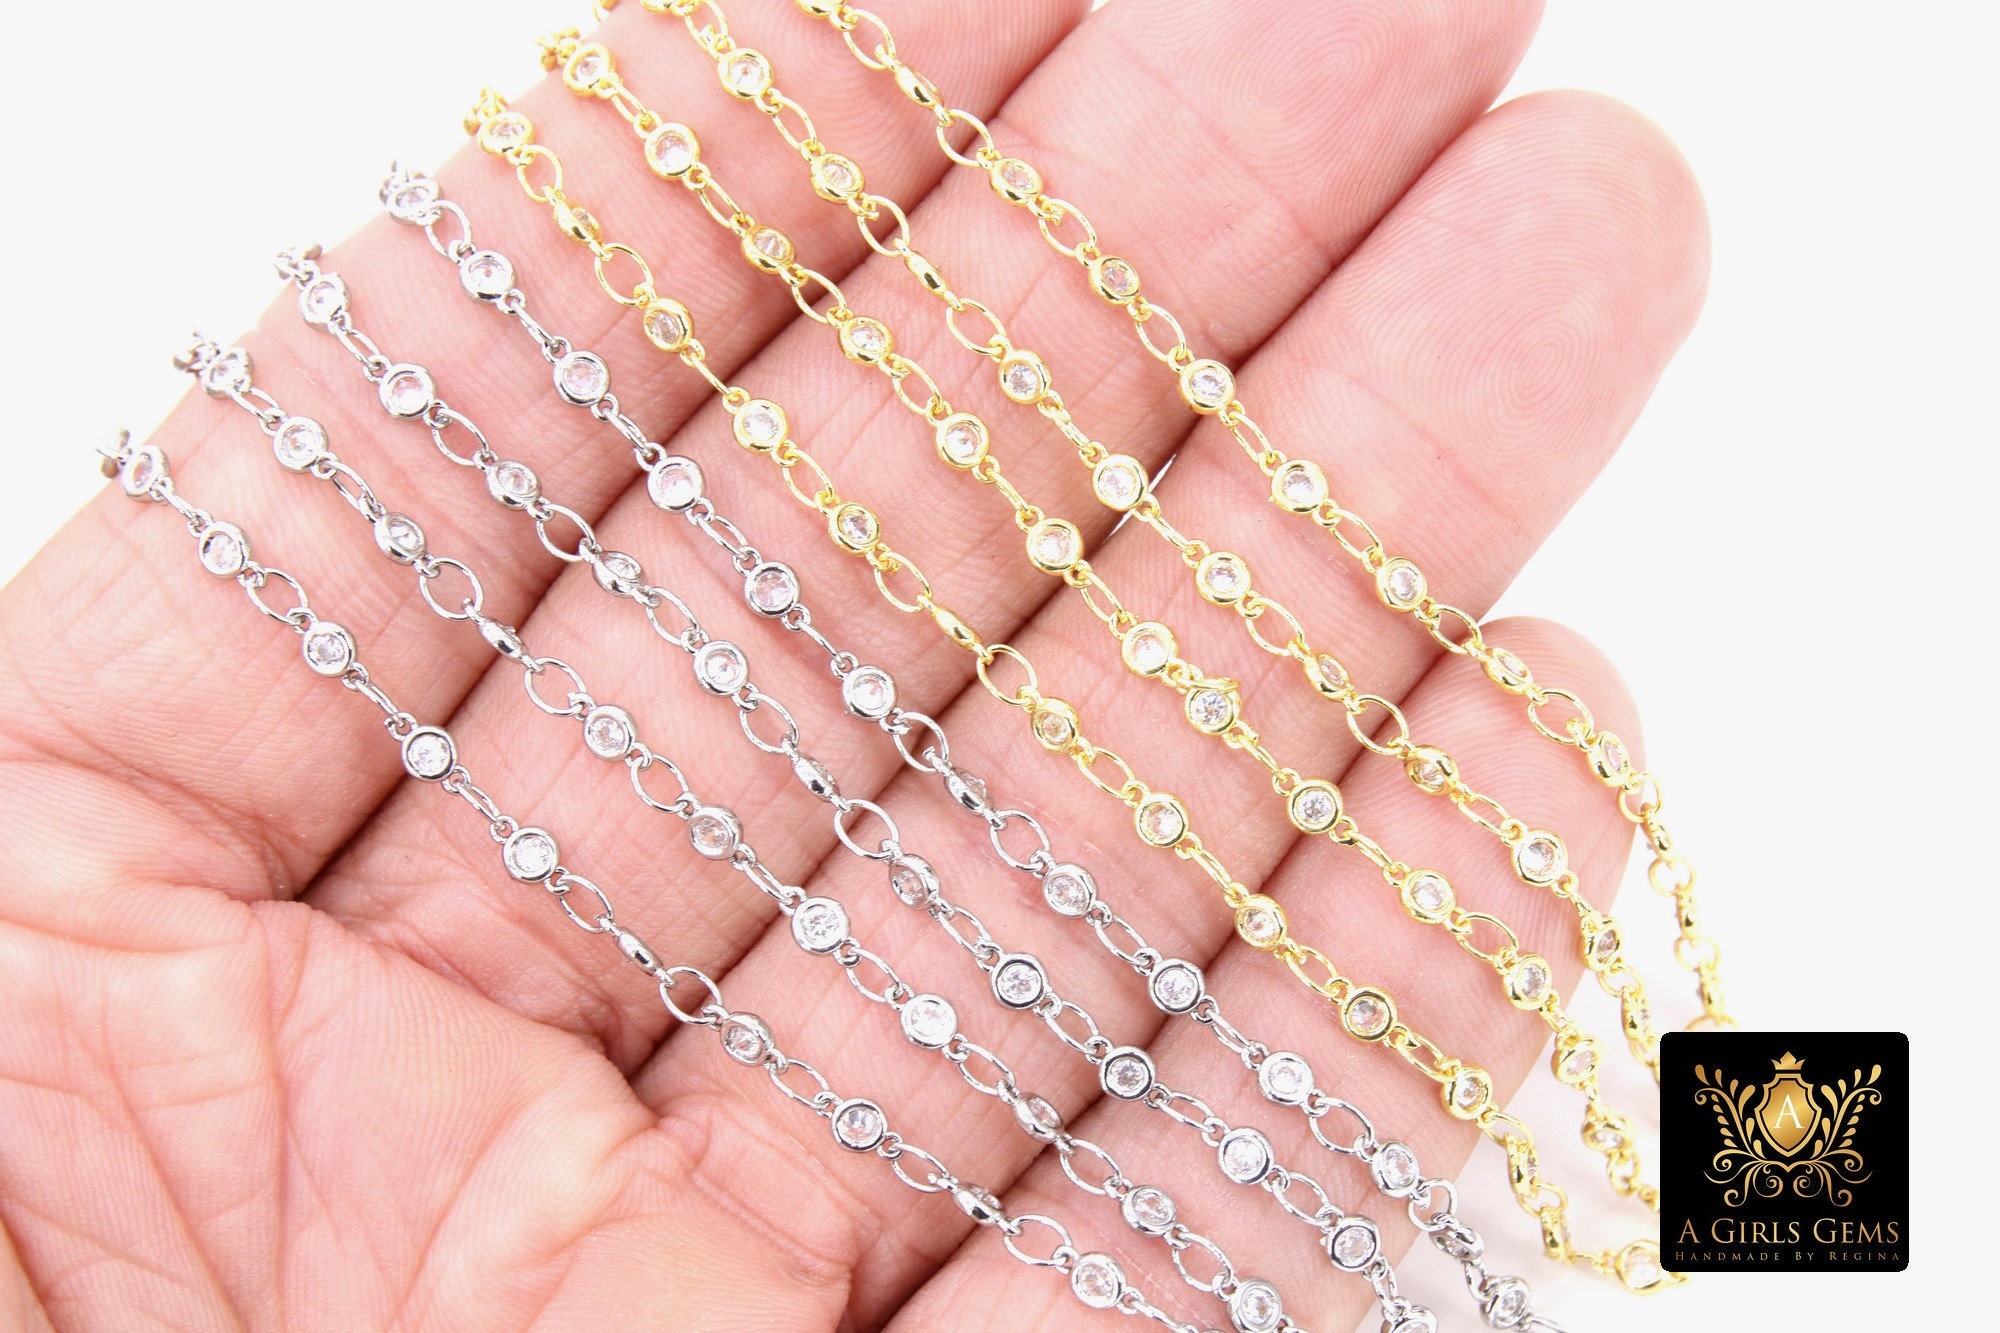 DIY Jewelry Accessories 14K Gold Plated Tail Chain Hanging Piece Extender  Chain Connectors Components Necklace Making Supplies